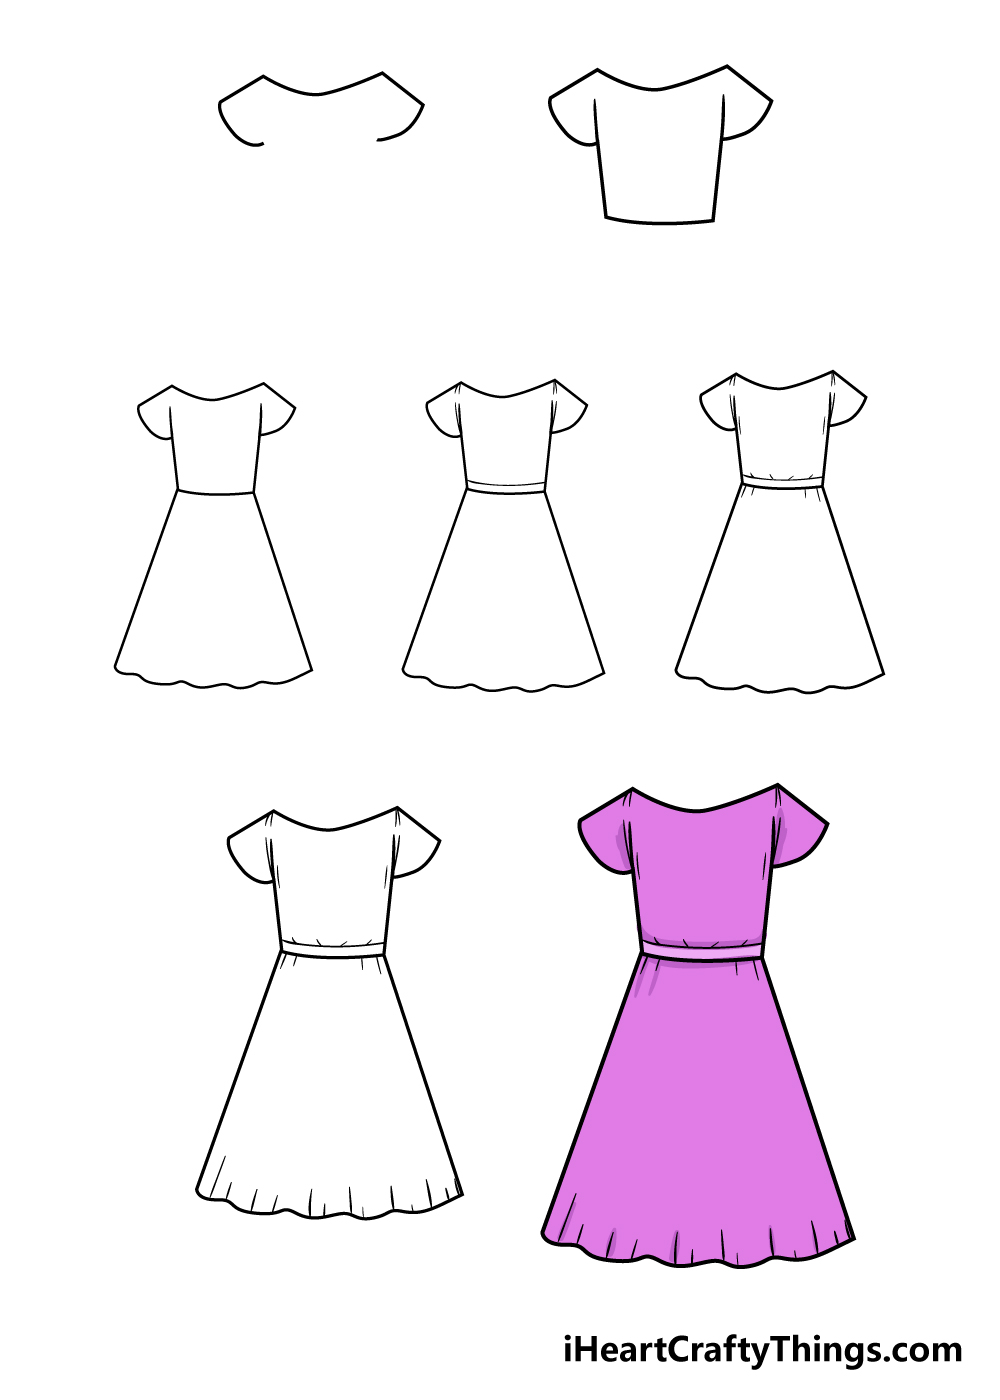 how to draw dress in 7 steps